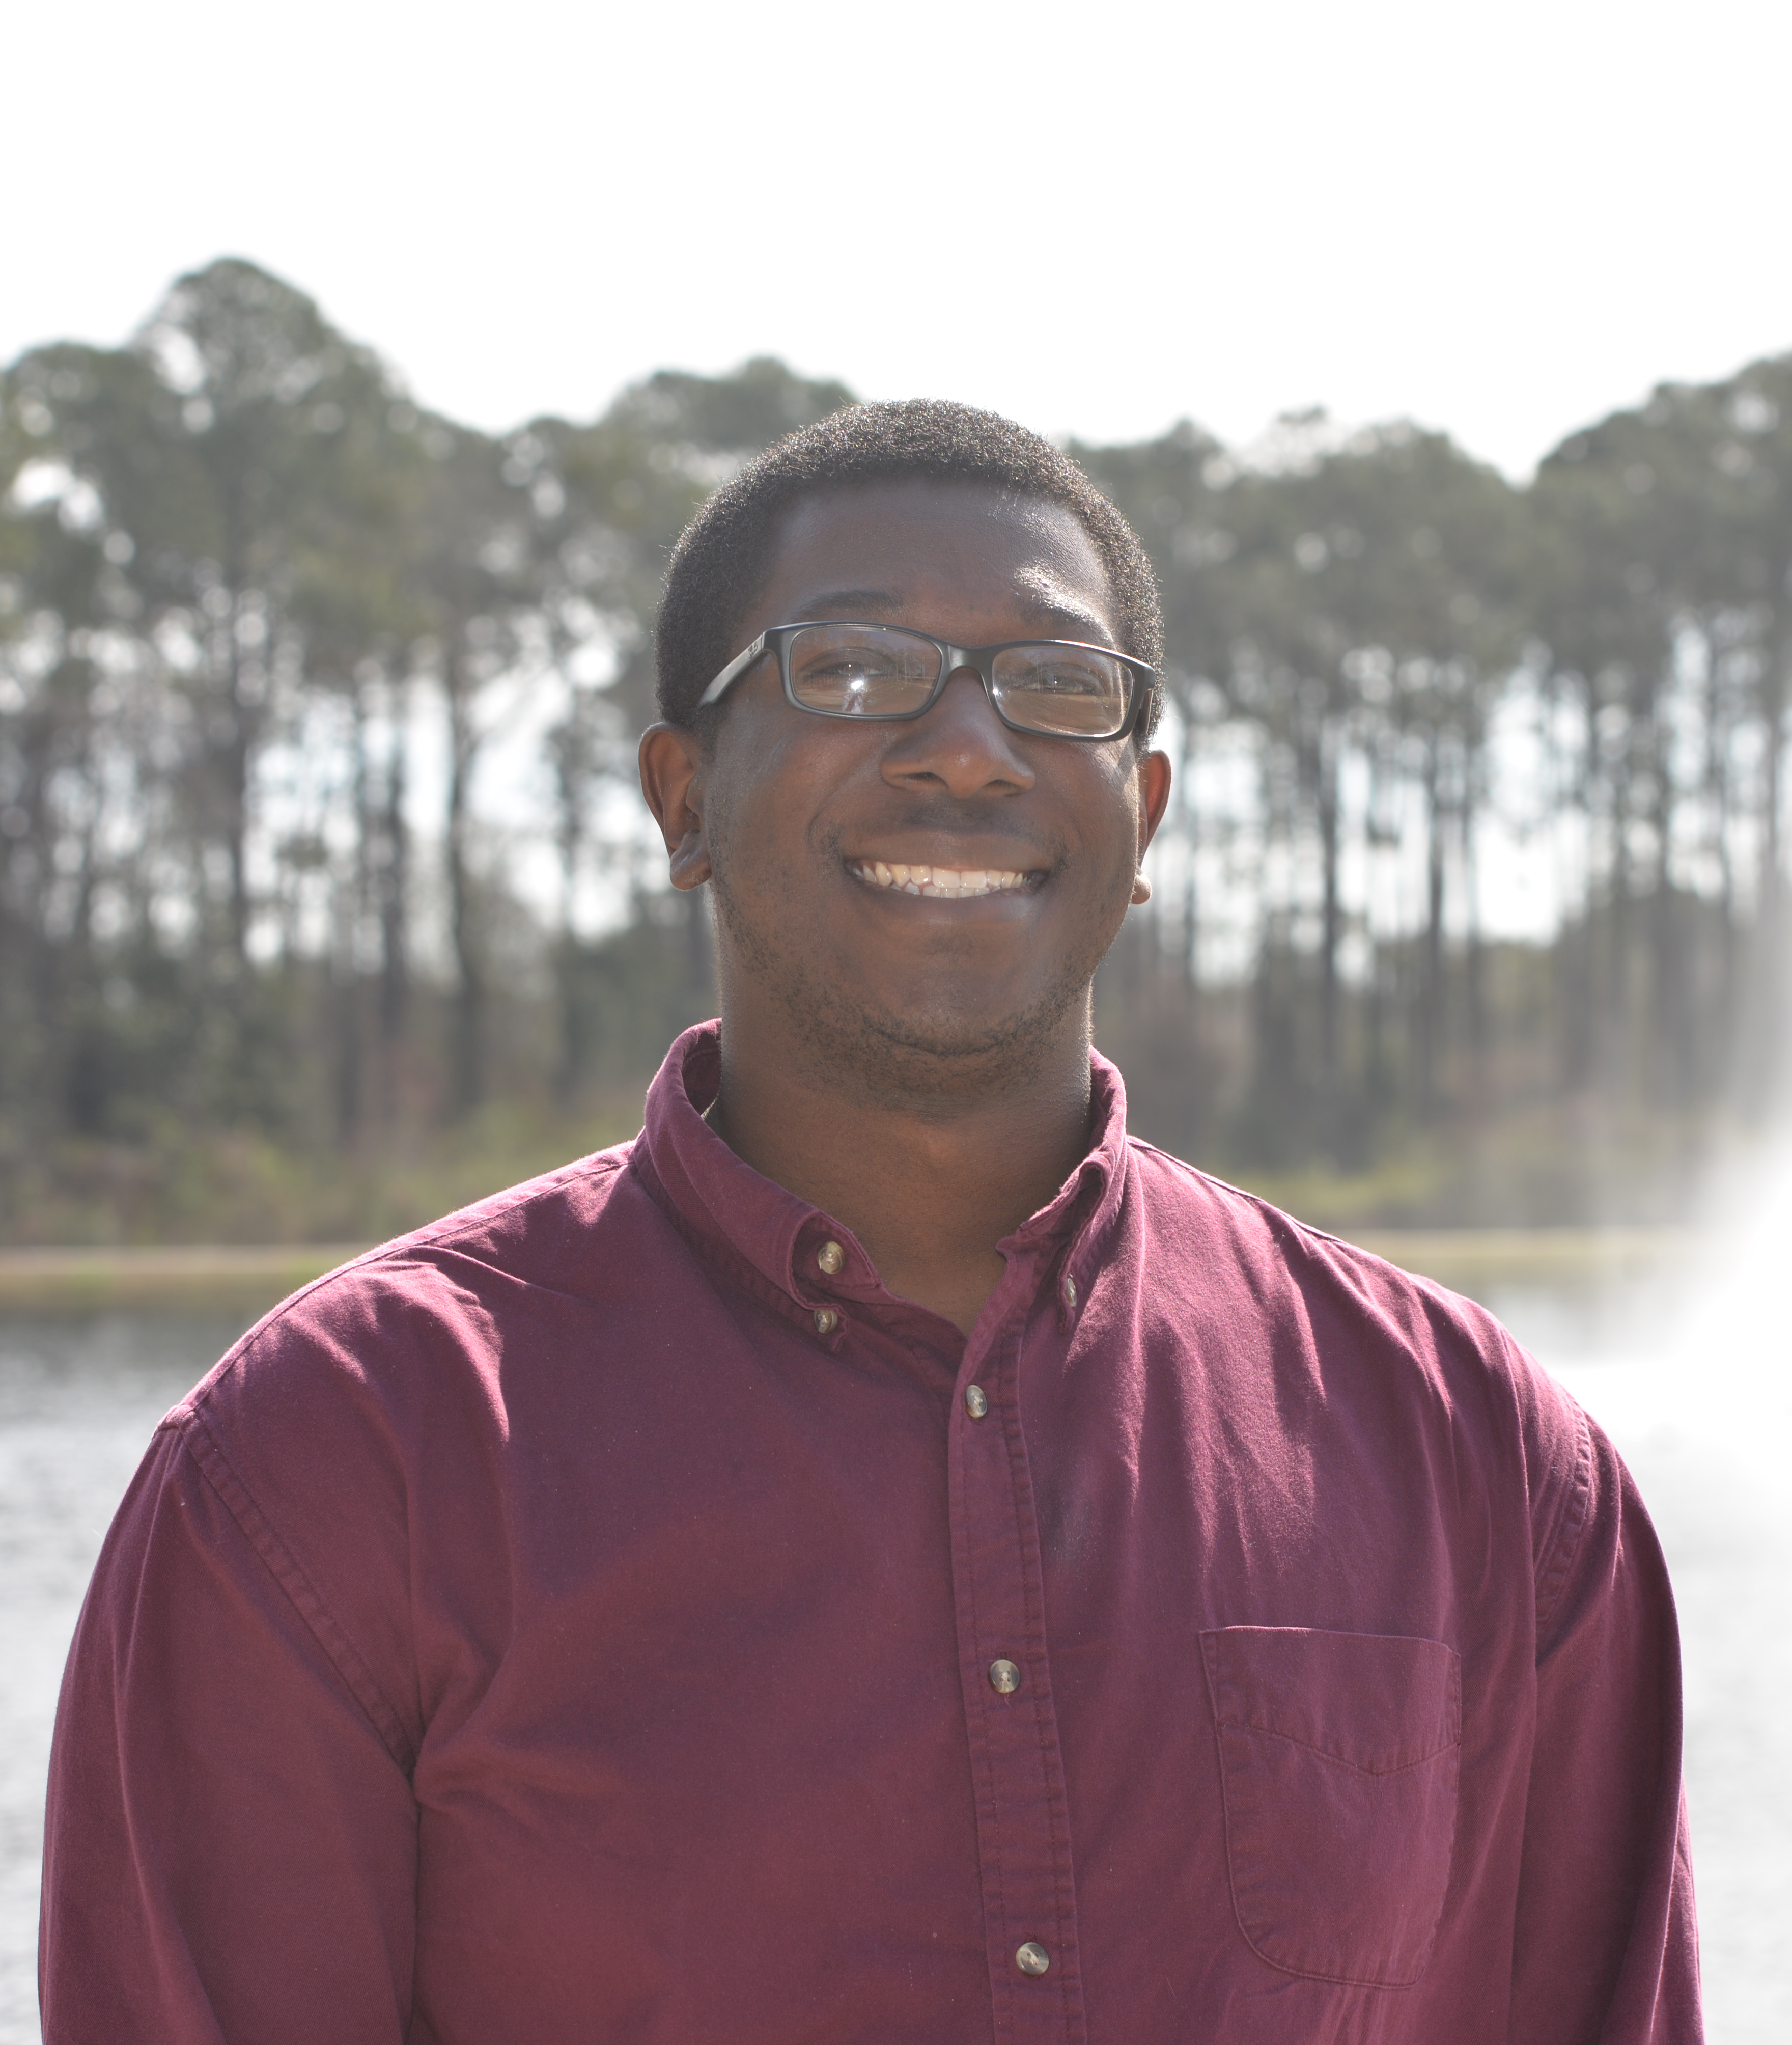 Student Eric Seals works for CCGA Serves, a student volunteer organization, and continues to motivate other students to give back in their community.